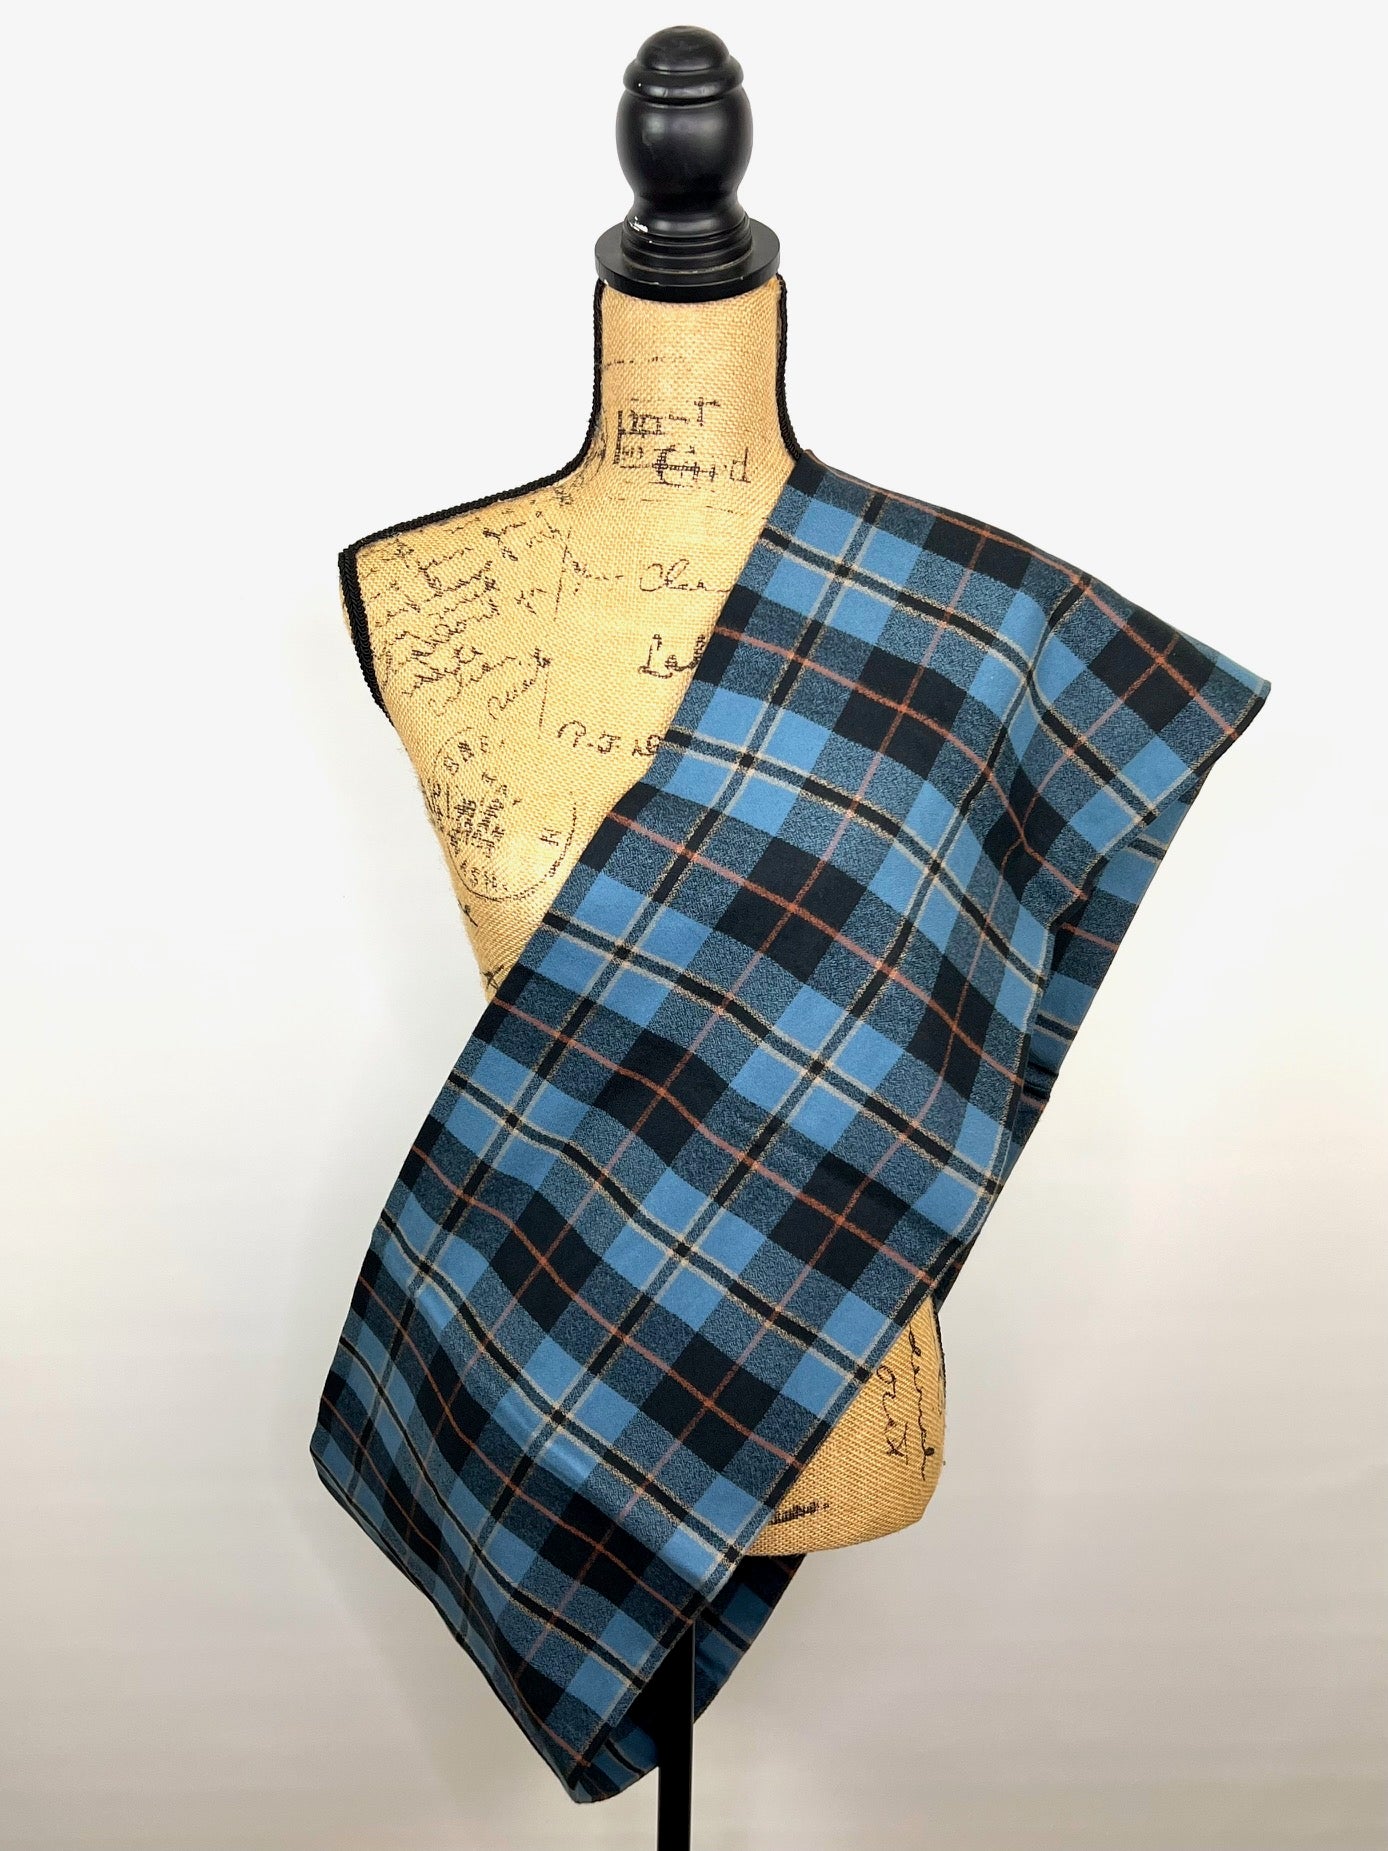 Luxe Collection Smoky Blue and Black Plaid with Persimmon and Pale Yellow Accent Infinity and Blanket Scarves